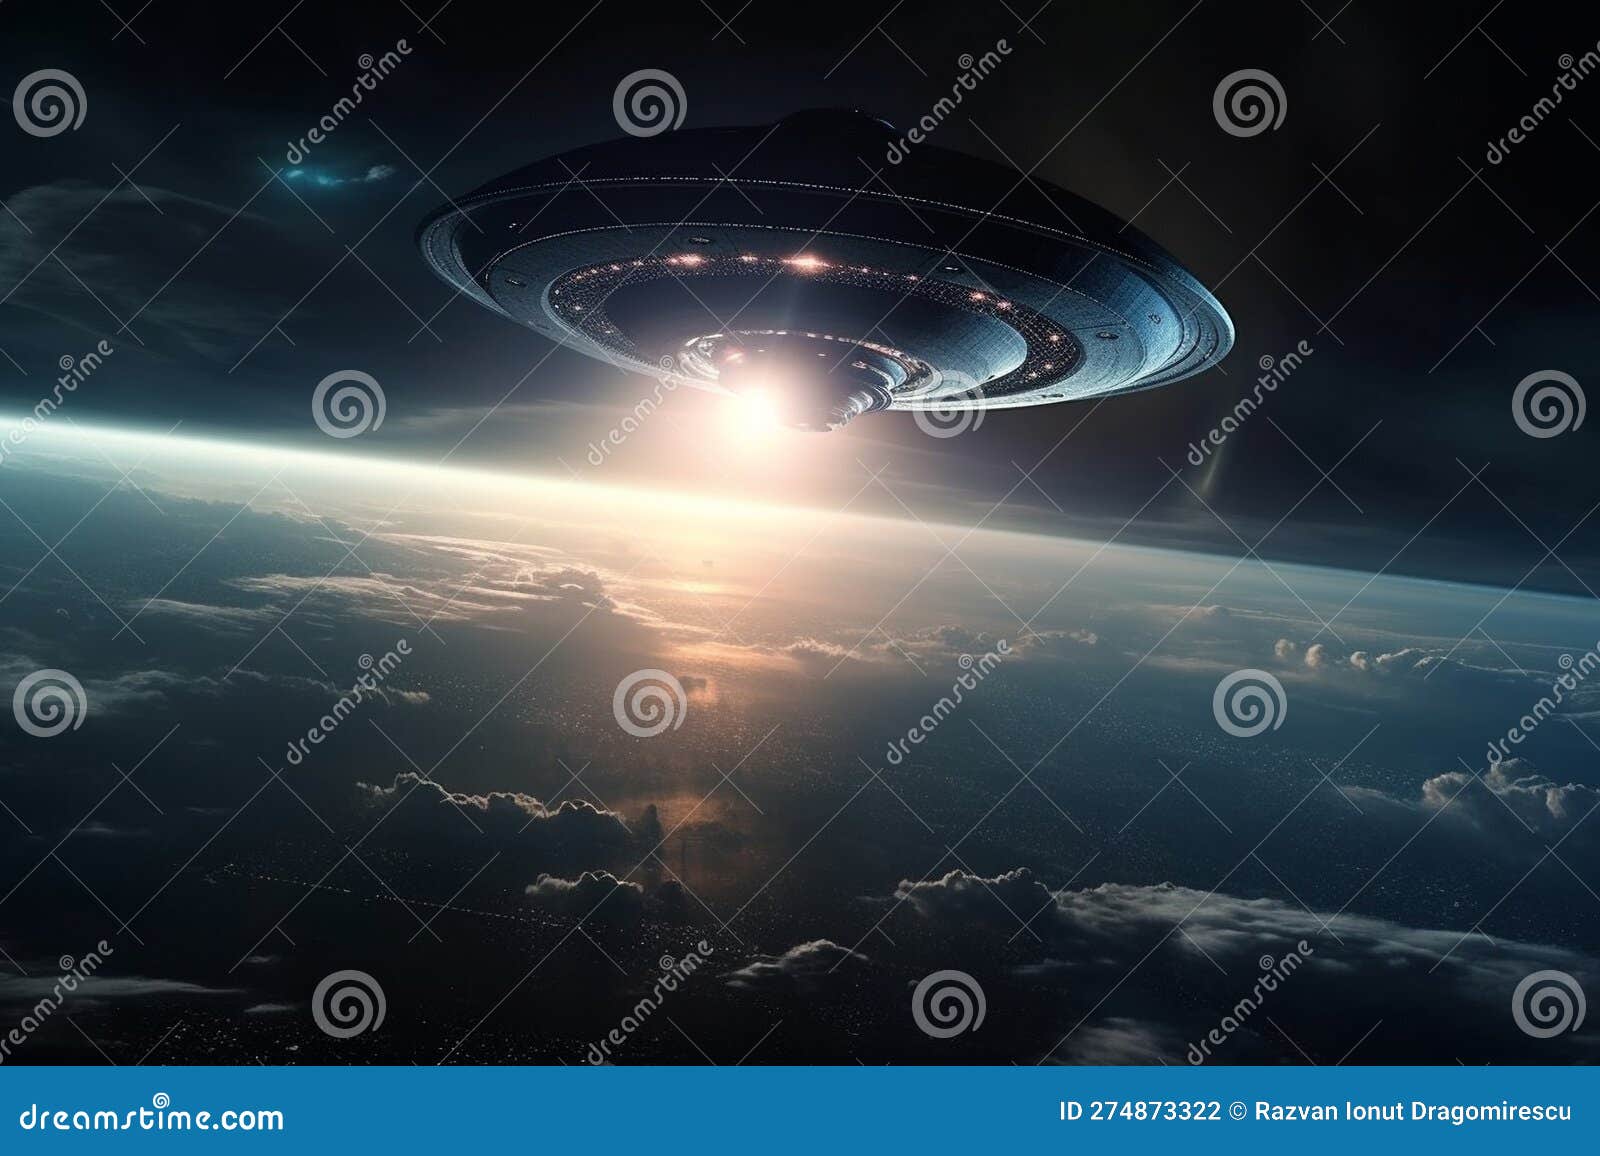 UFO Approaching Earth from Space, with a Sense of Mystery and Intrigue